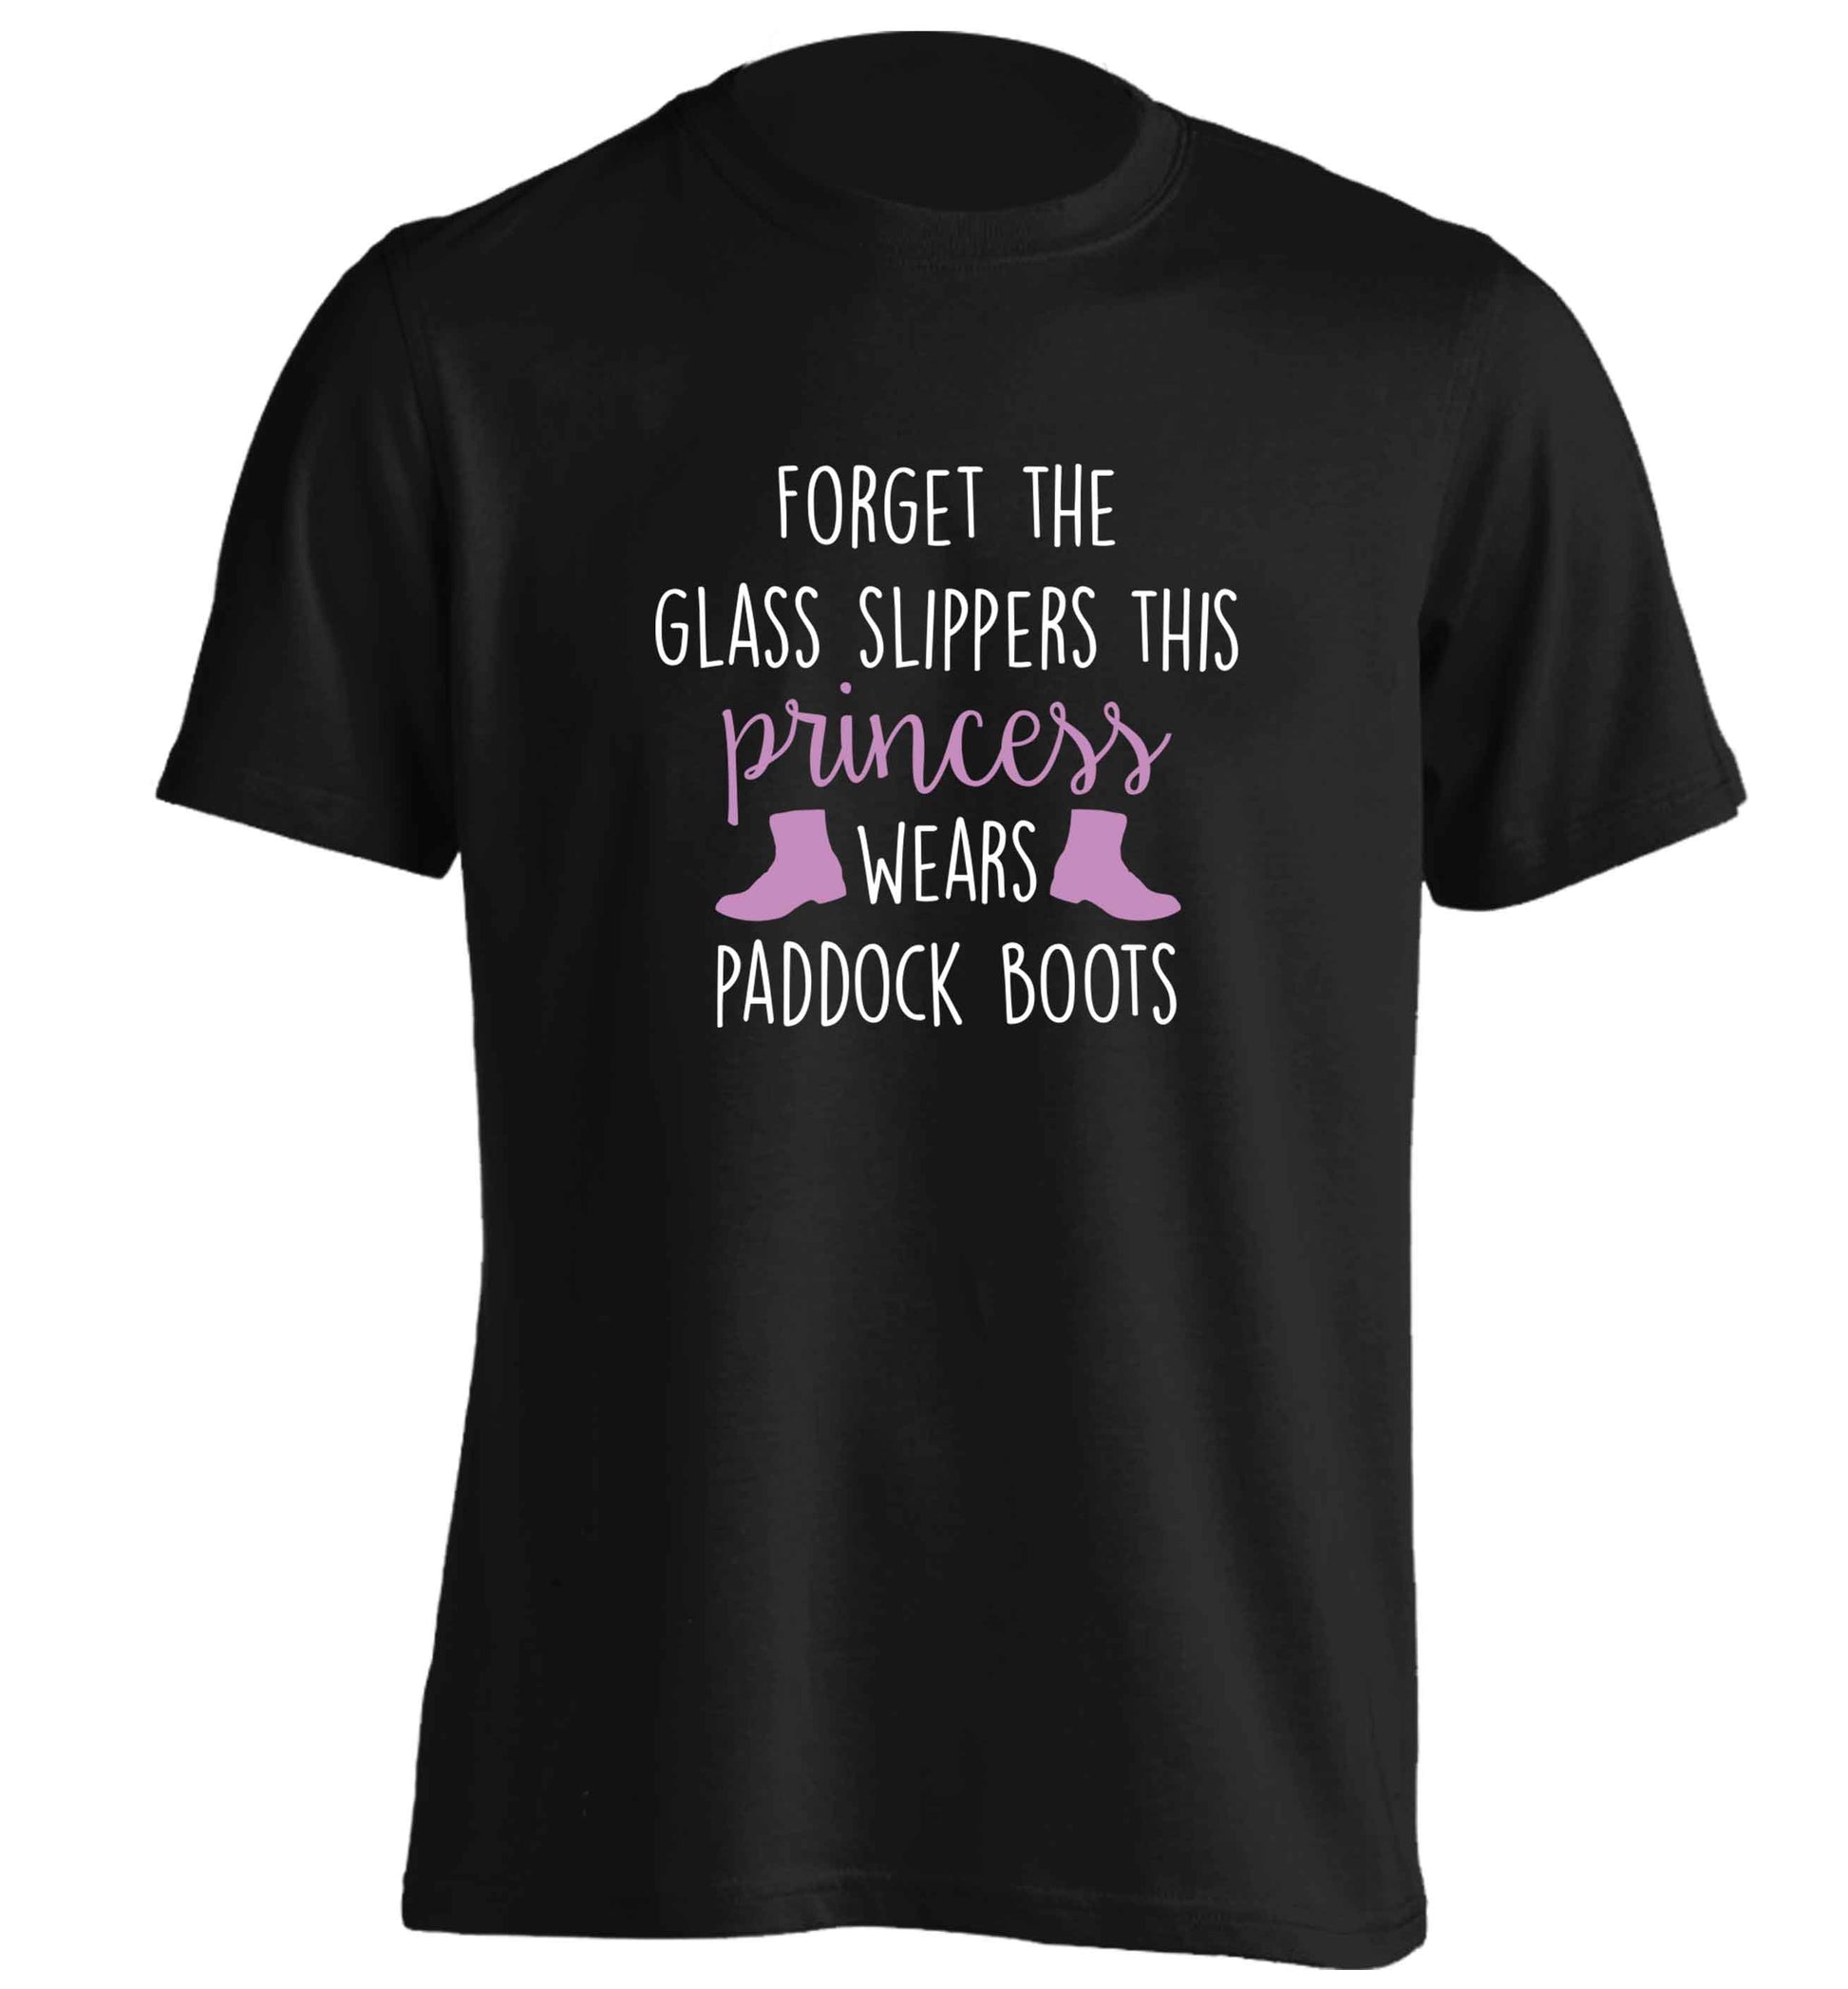 Forget the glass slippers this princess wears paddock boots adults unisex black Tshirt 2XL